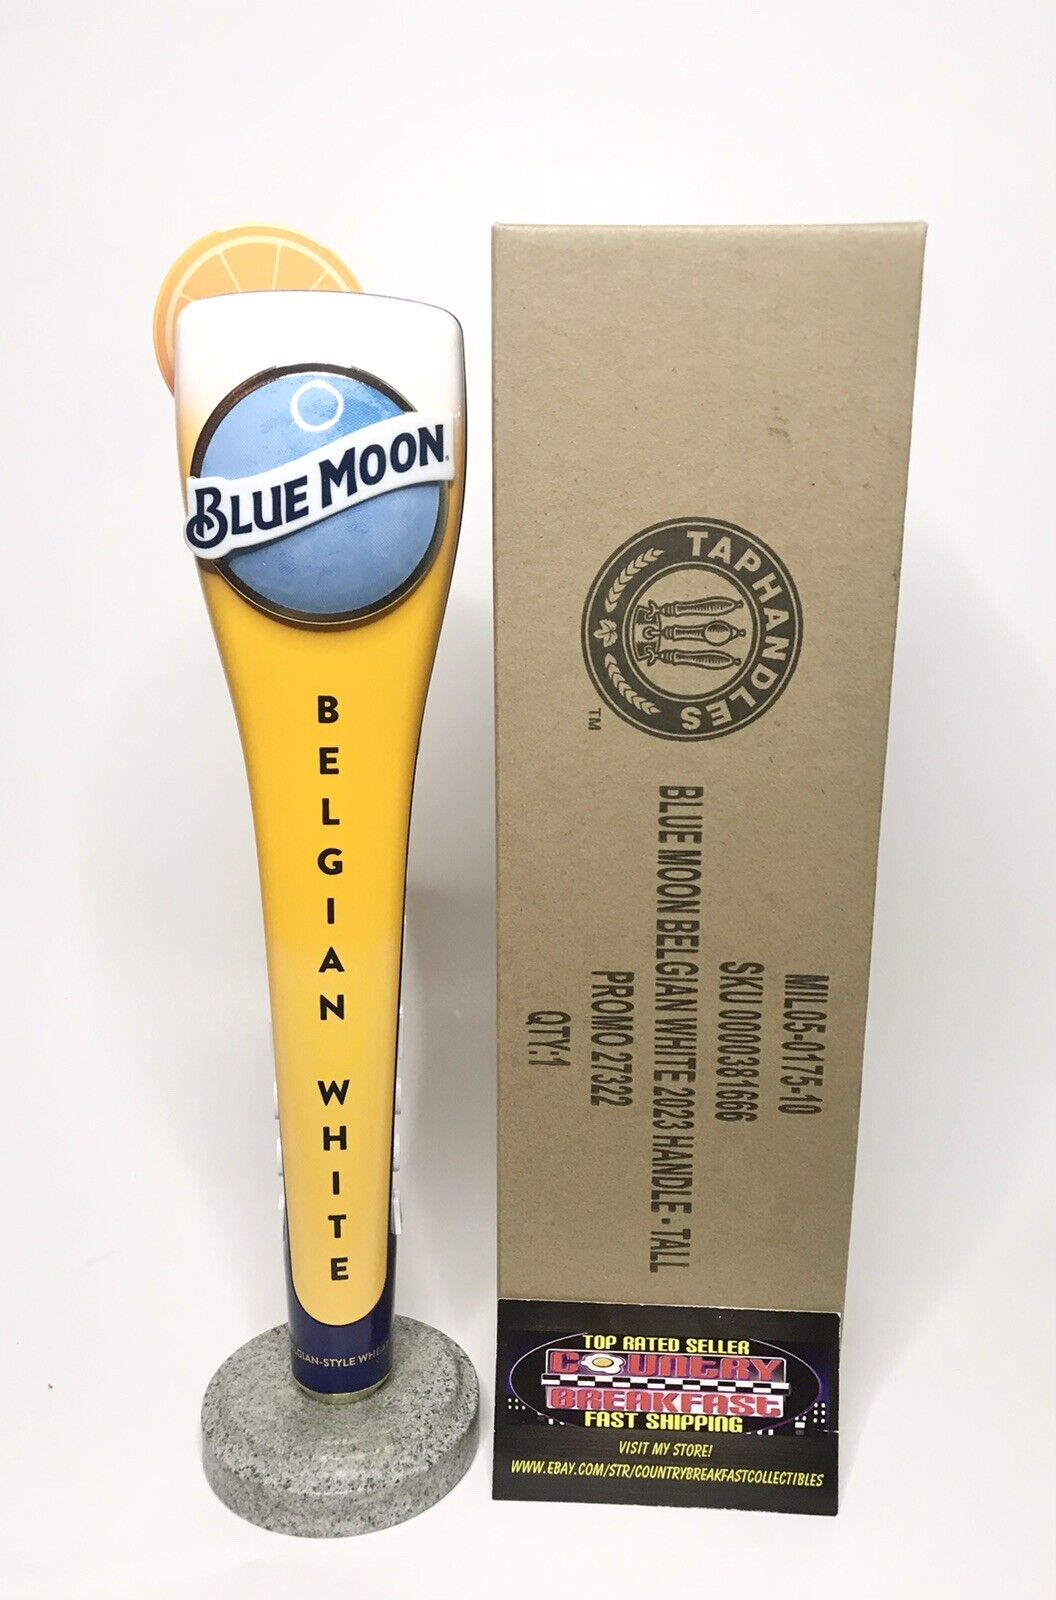 Blue Moon Belgian White Logo  Beer Tap Handle 11.5” Tall - Brand New In Box